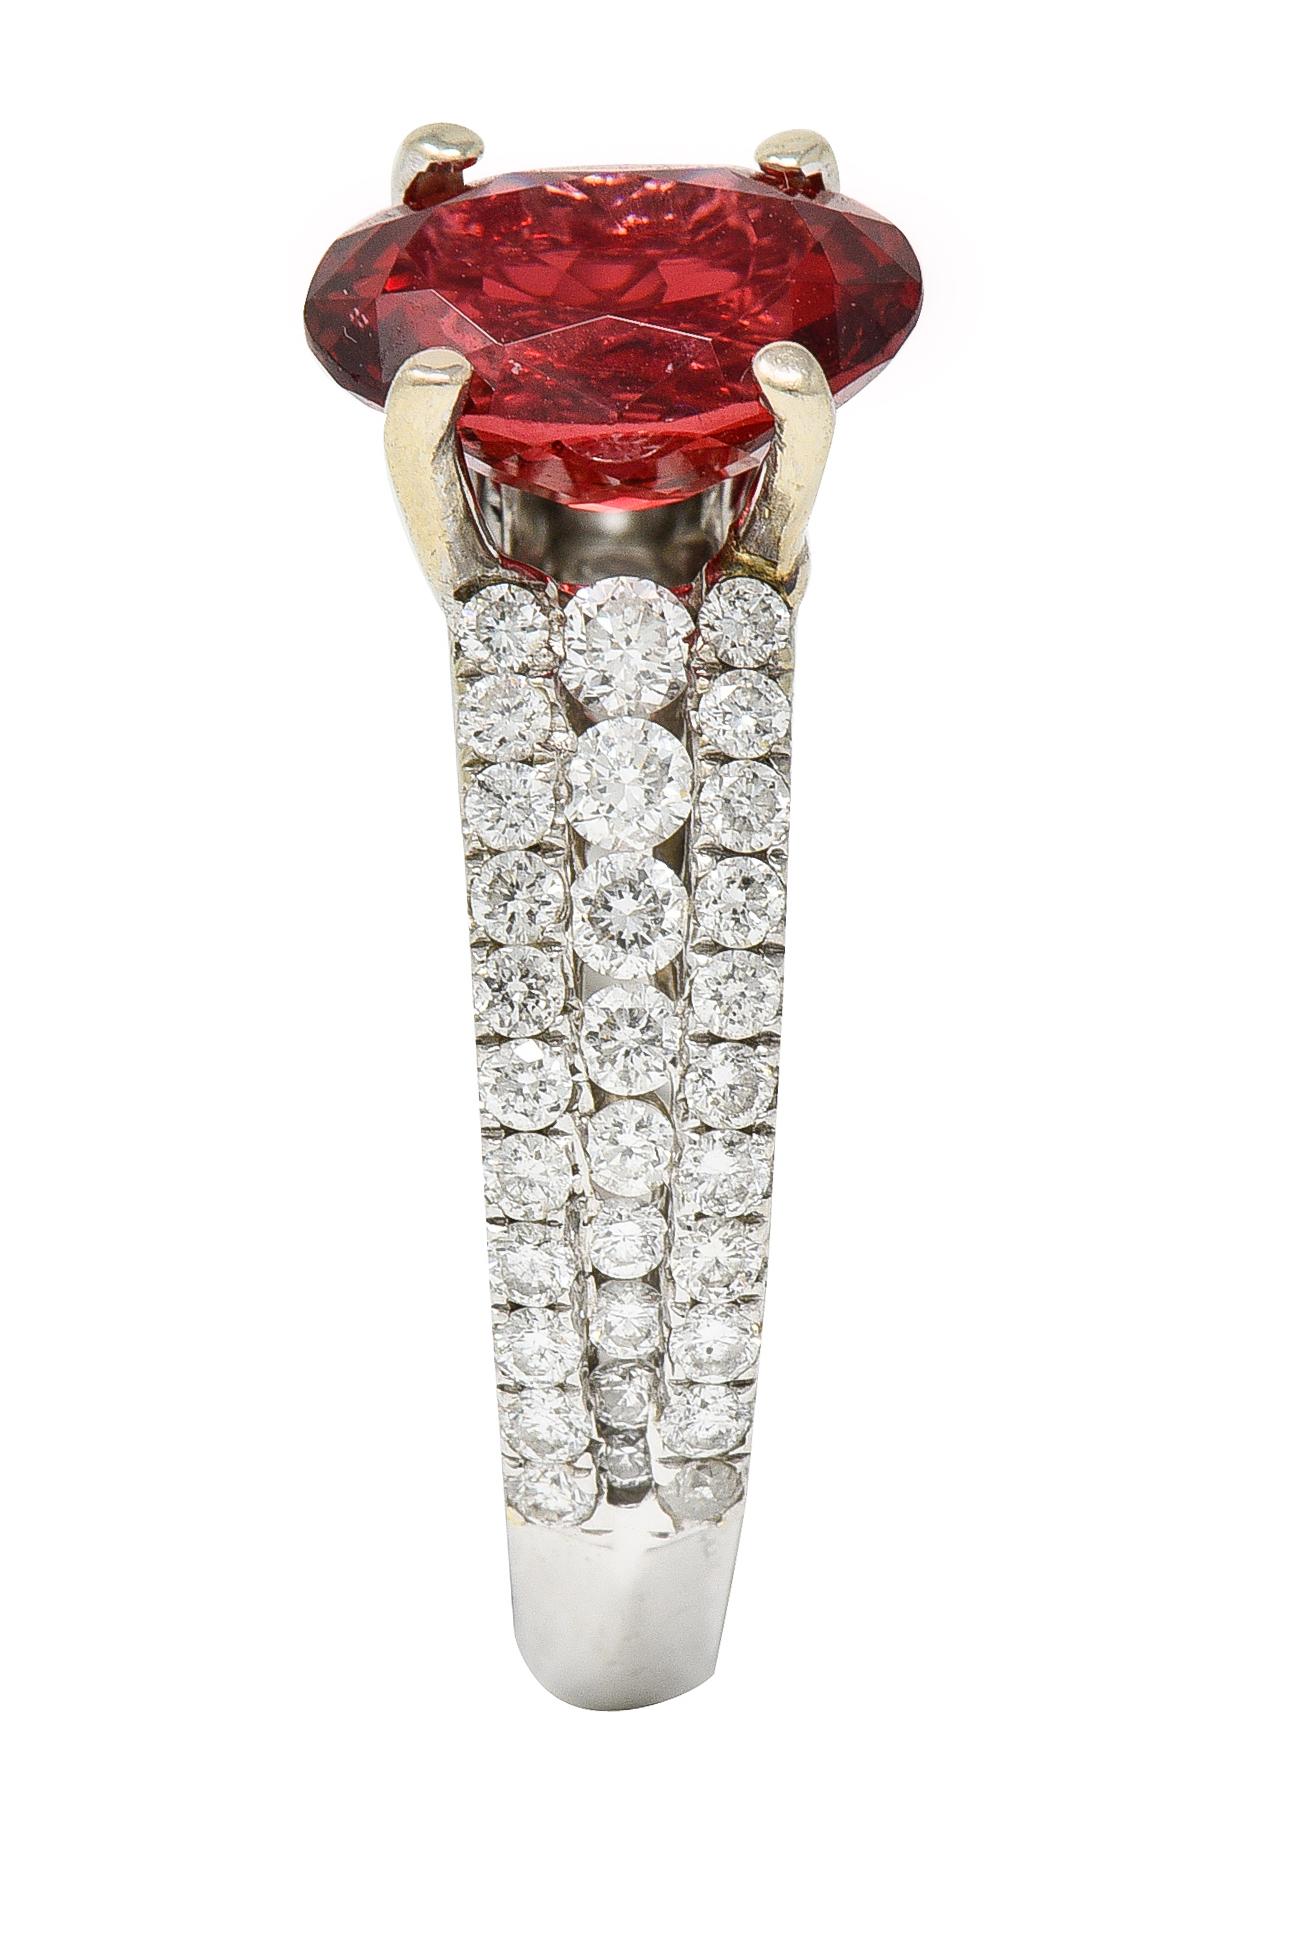 Contemporary 2.85 CTW Spinel Diamond 14 Karat White Gold Scroll Ring For Sale 6